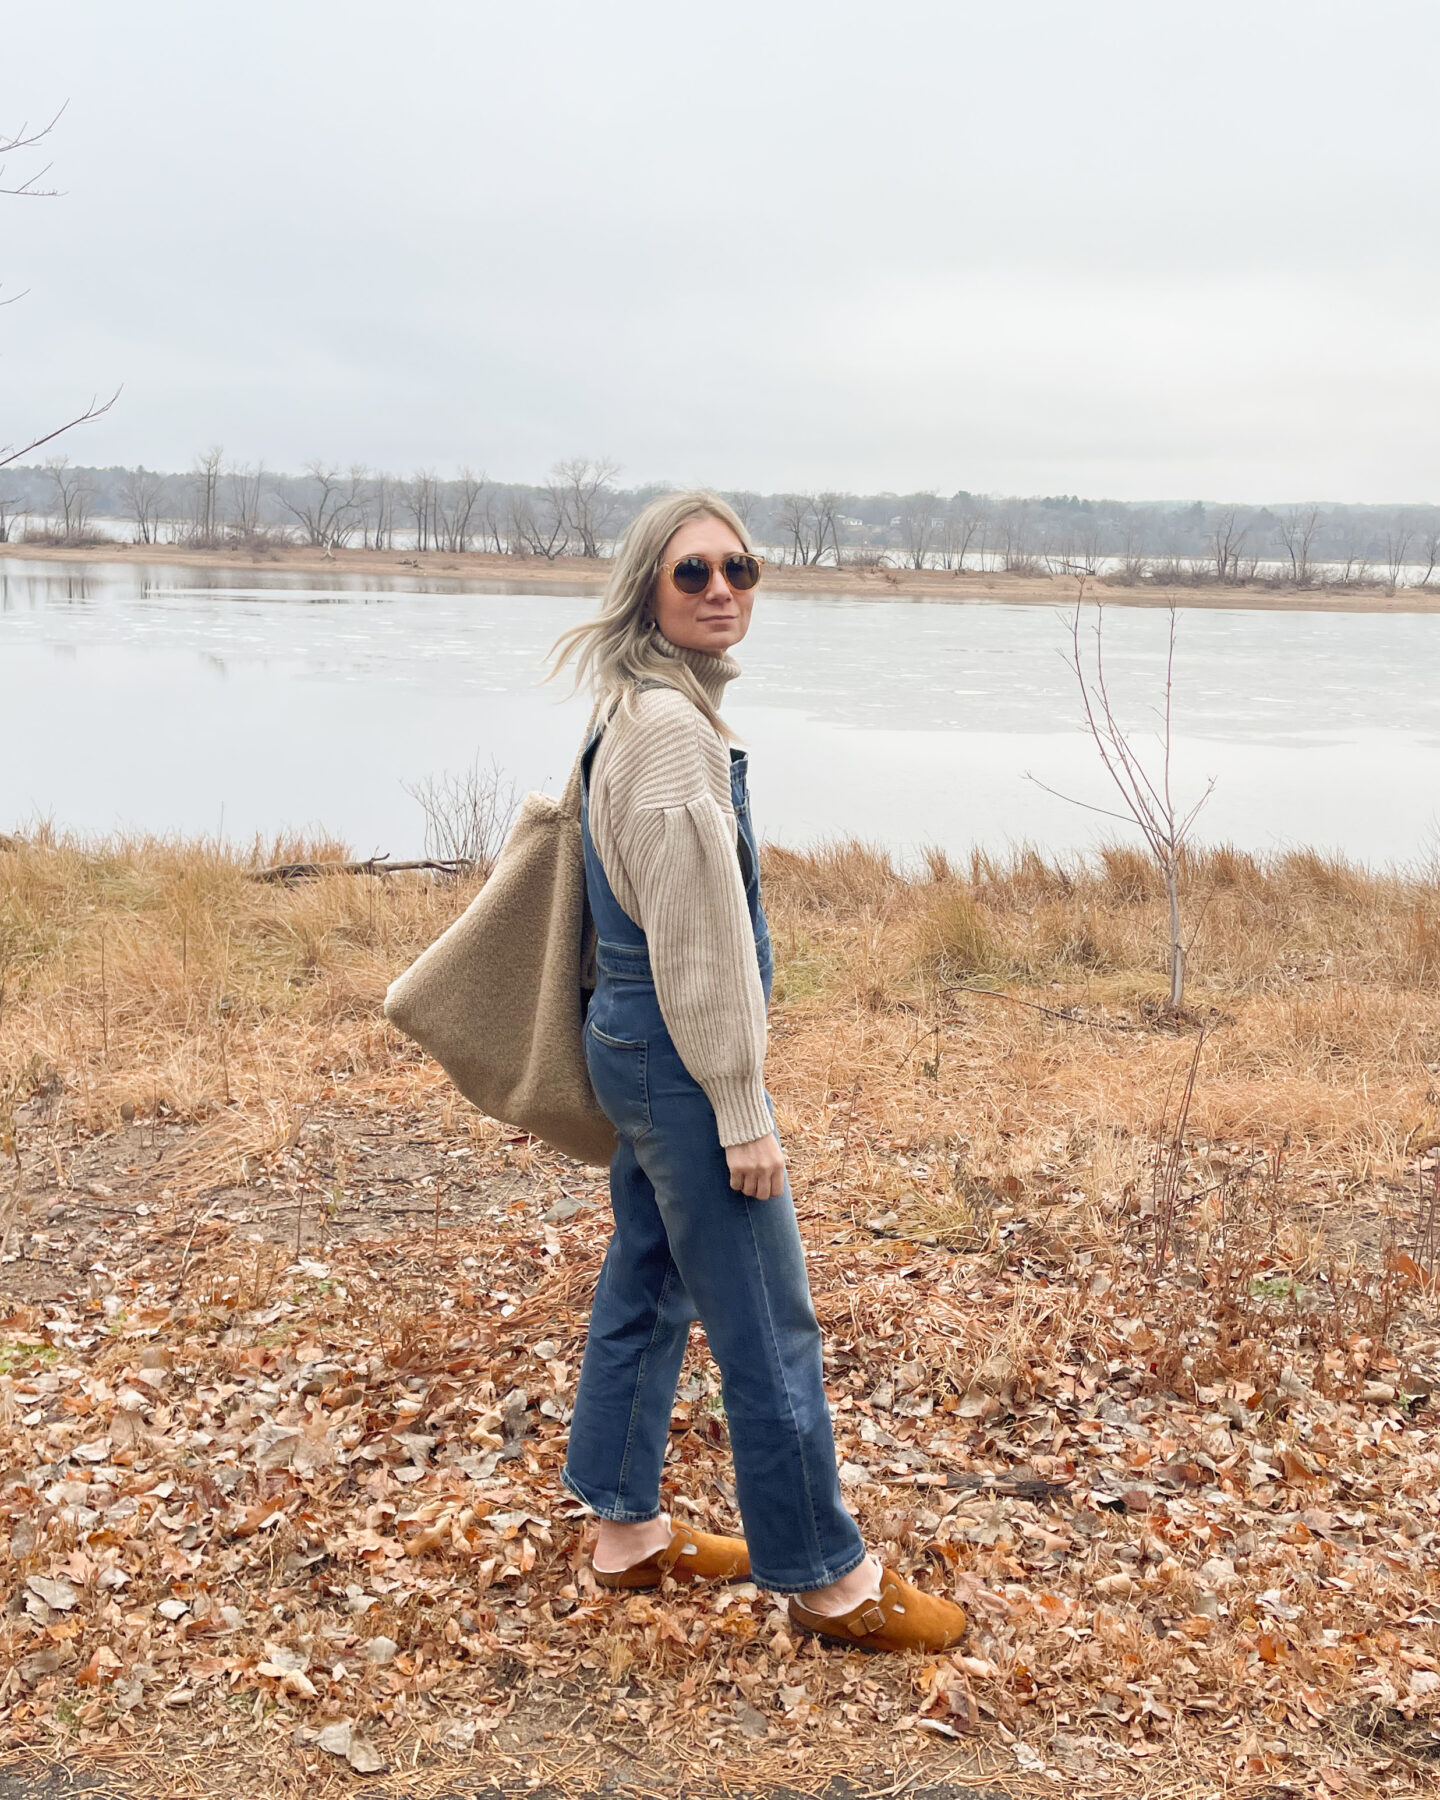 Karin Emily wears a statement sleeve turtleneck sweater and overalls from free assembly at walmart paired with birkenstock shearling clogs and a sherpa bag